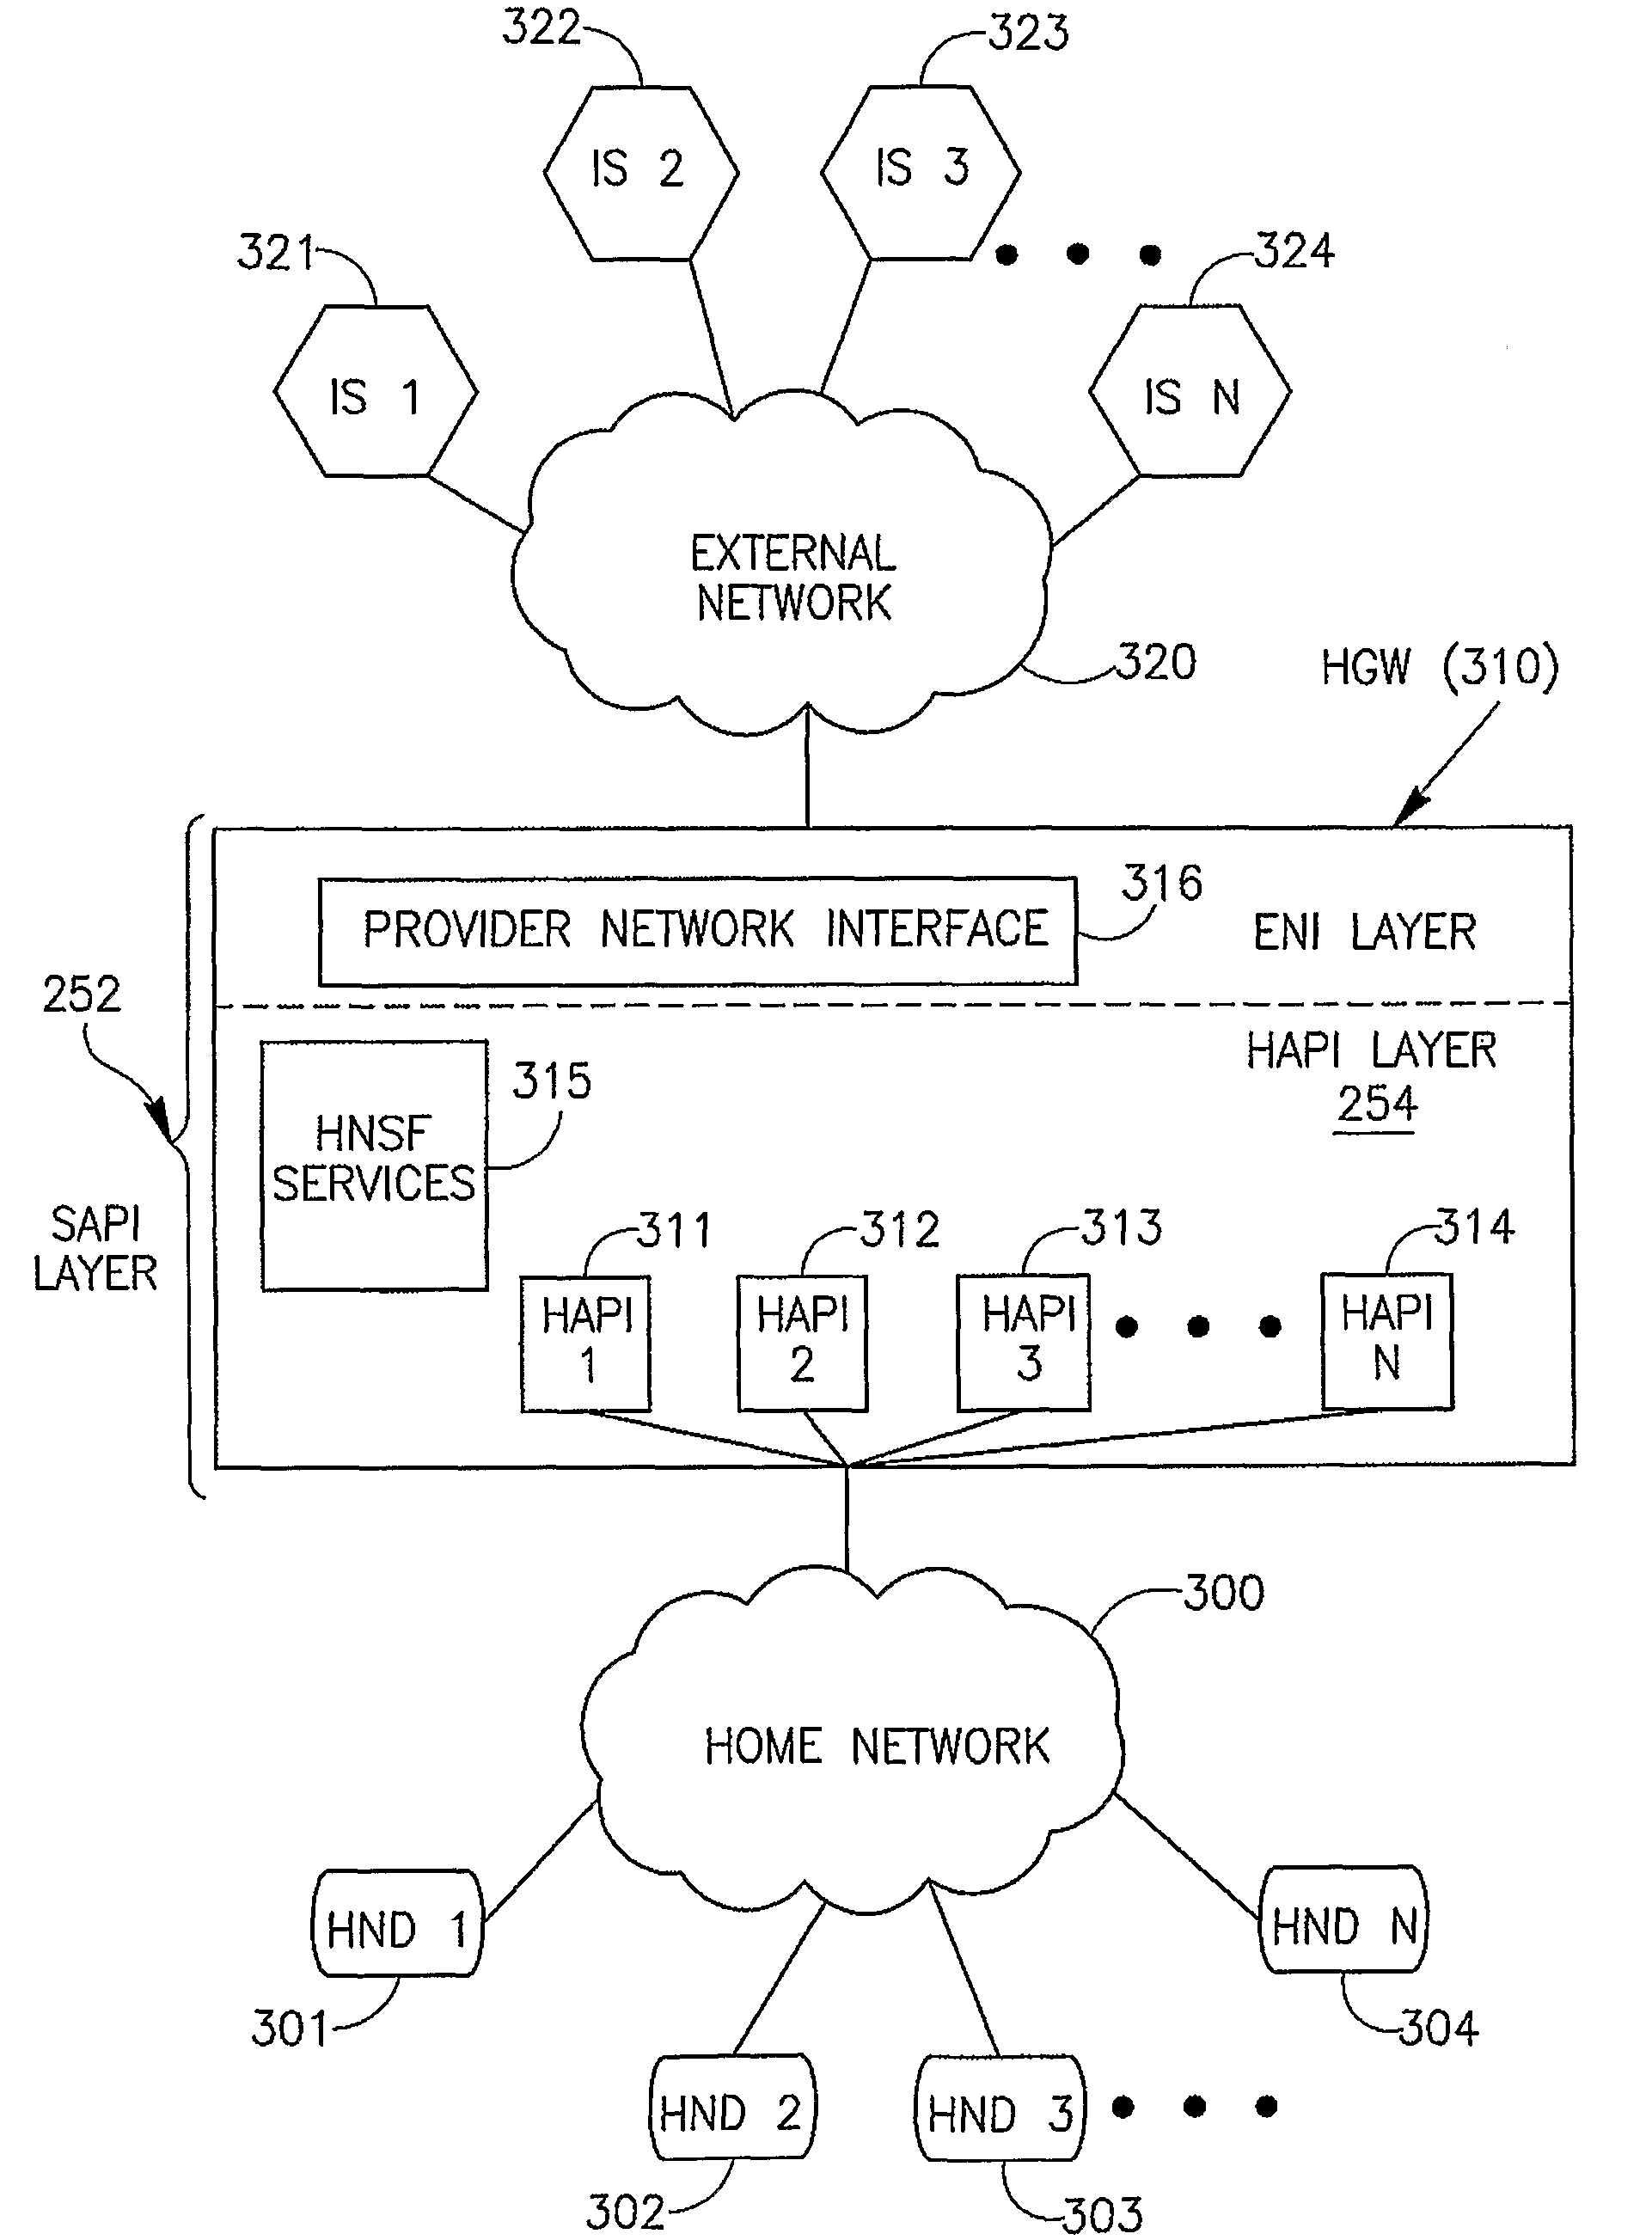 Architecture of gateway between a home network and an external network